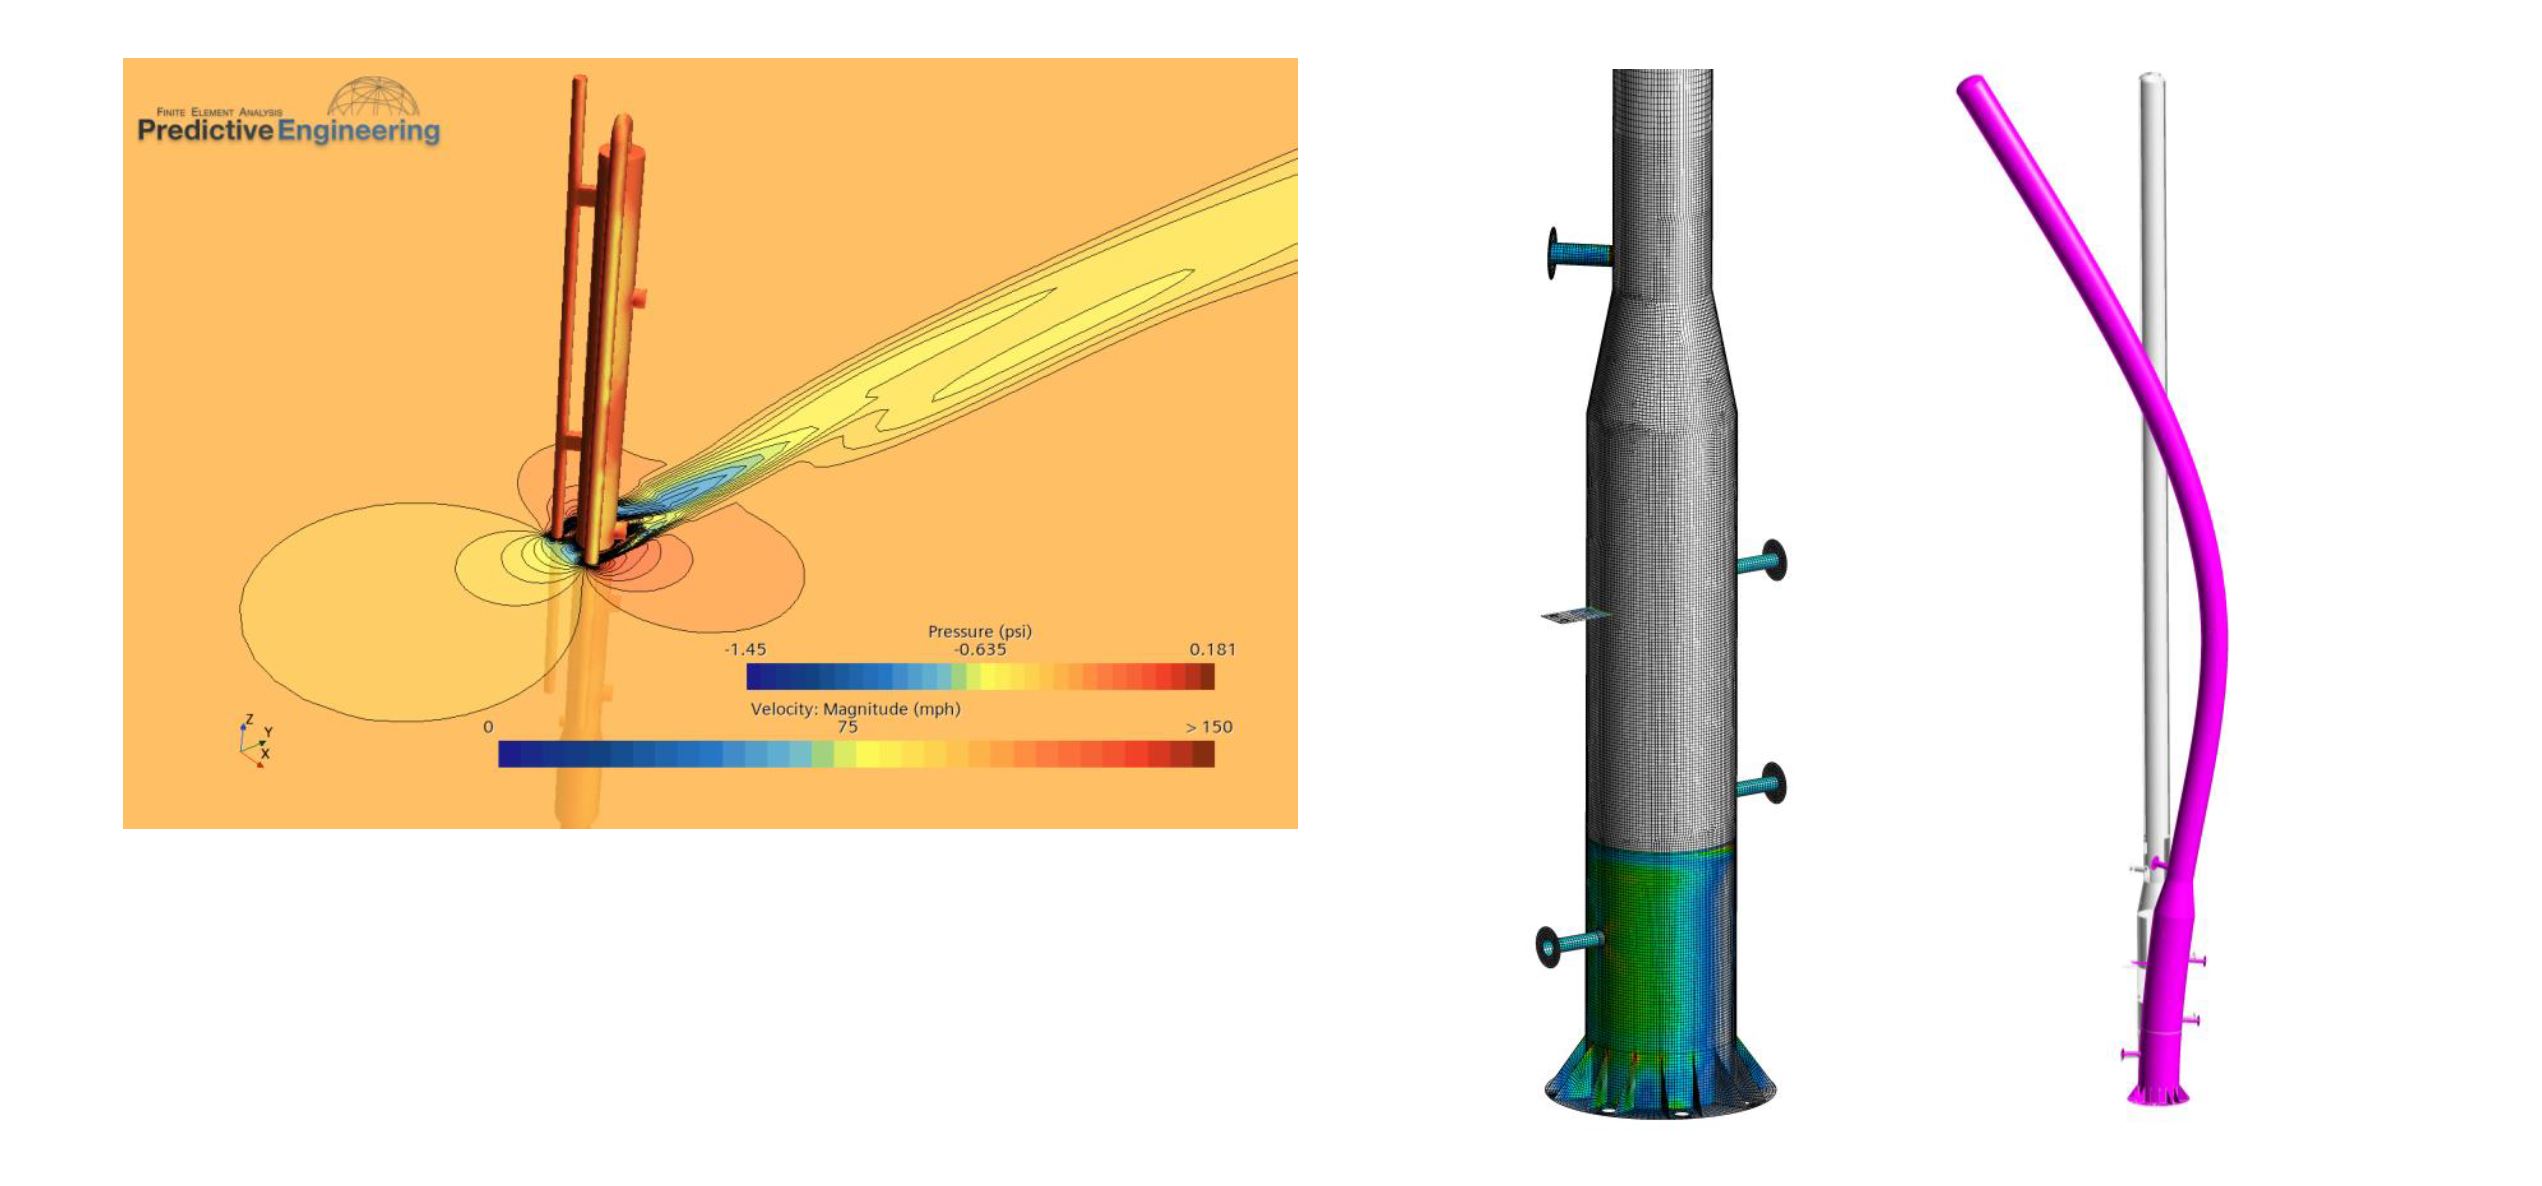 CFD and FEA Stress, Fatigue and Vibration Analysis on NRU Column – ASME Section VIII, Division 2 – Predictive Engineering BPVC Consulting Services